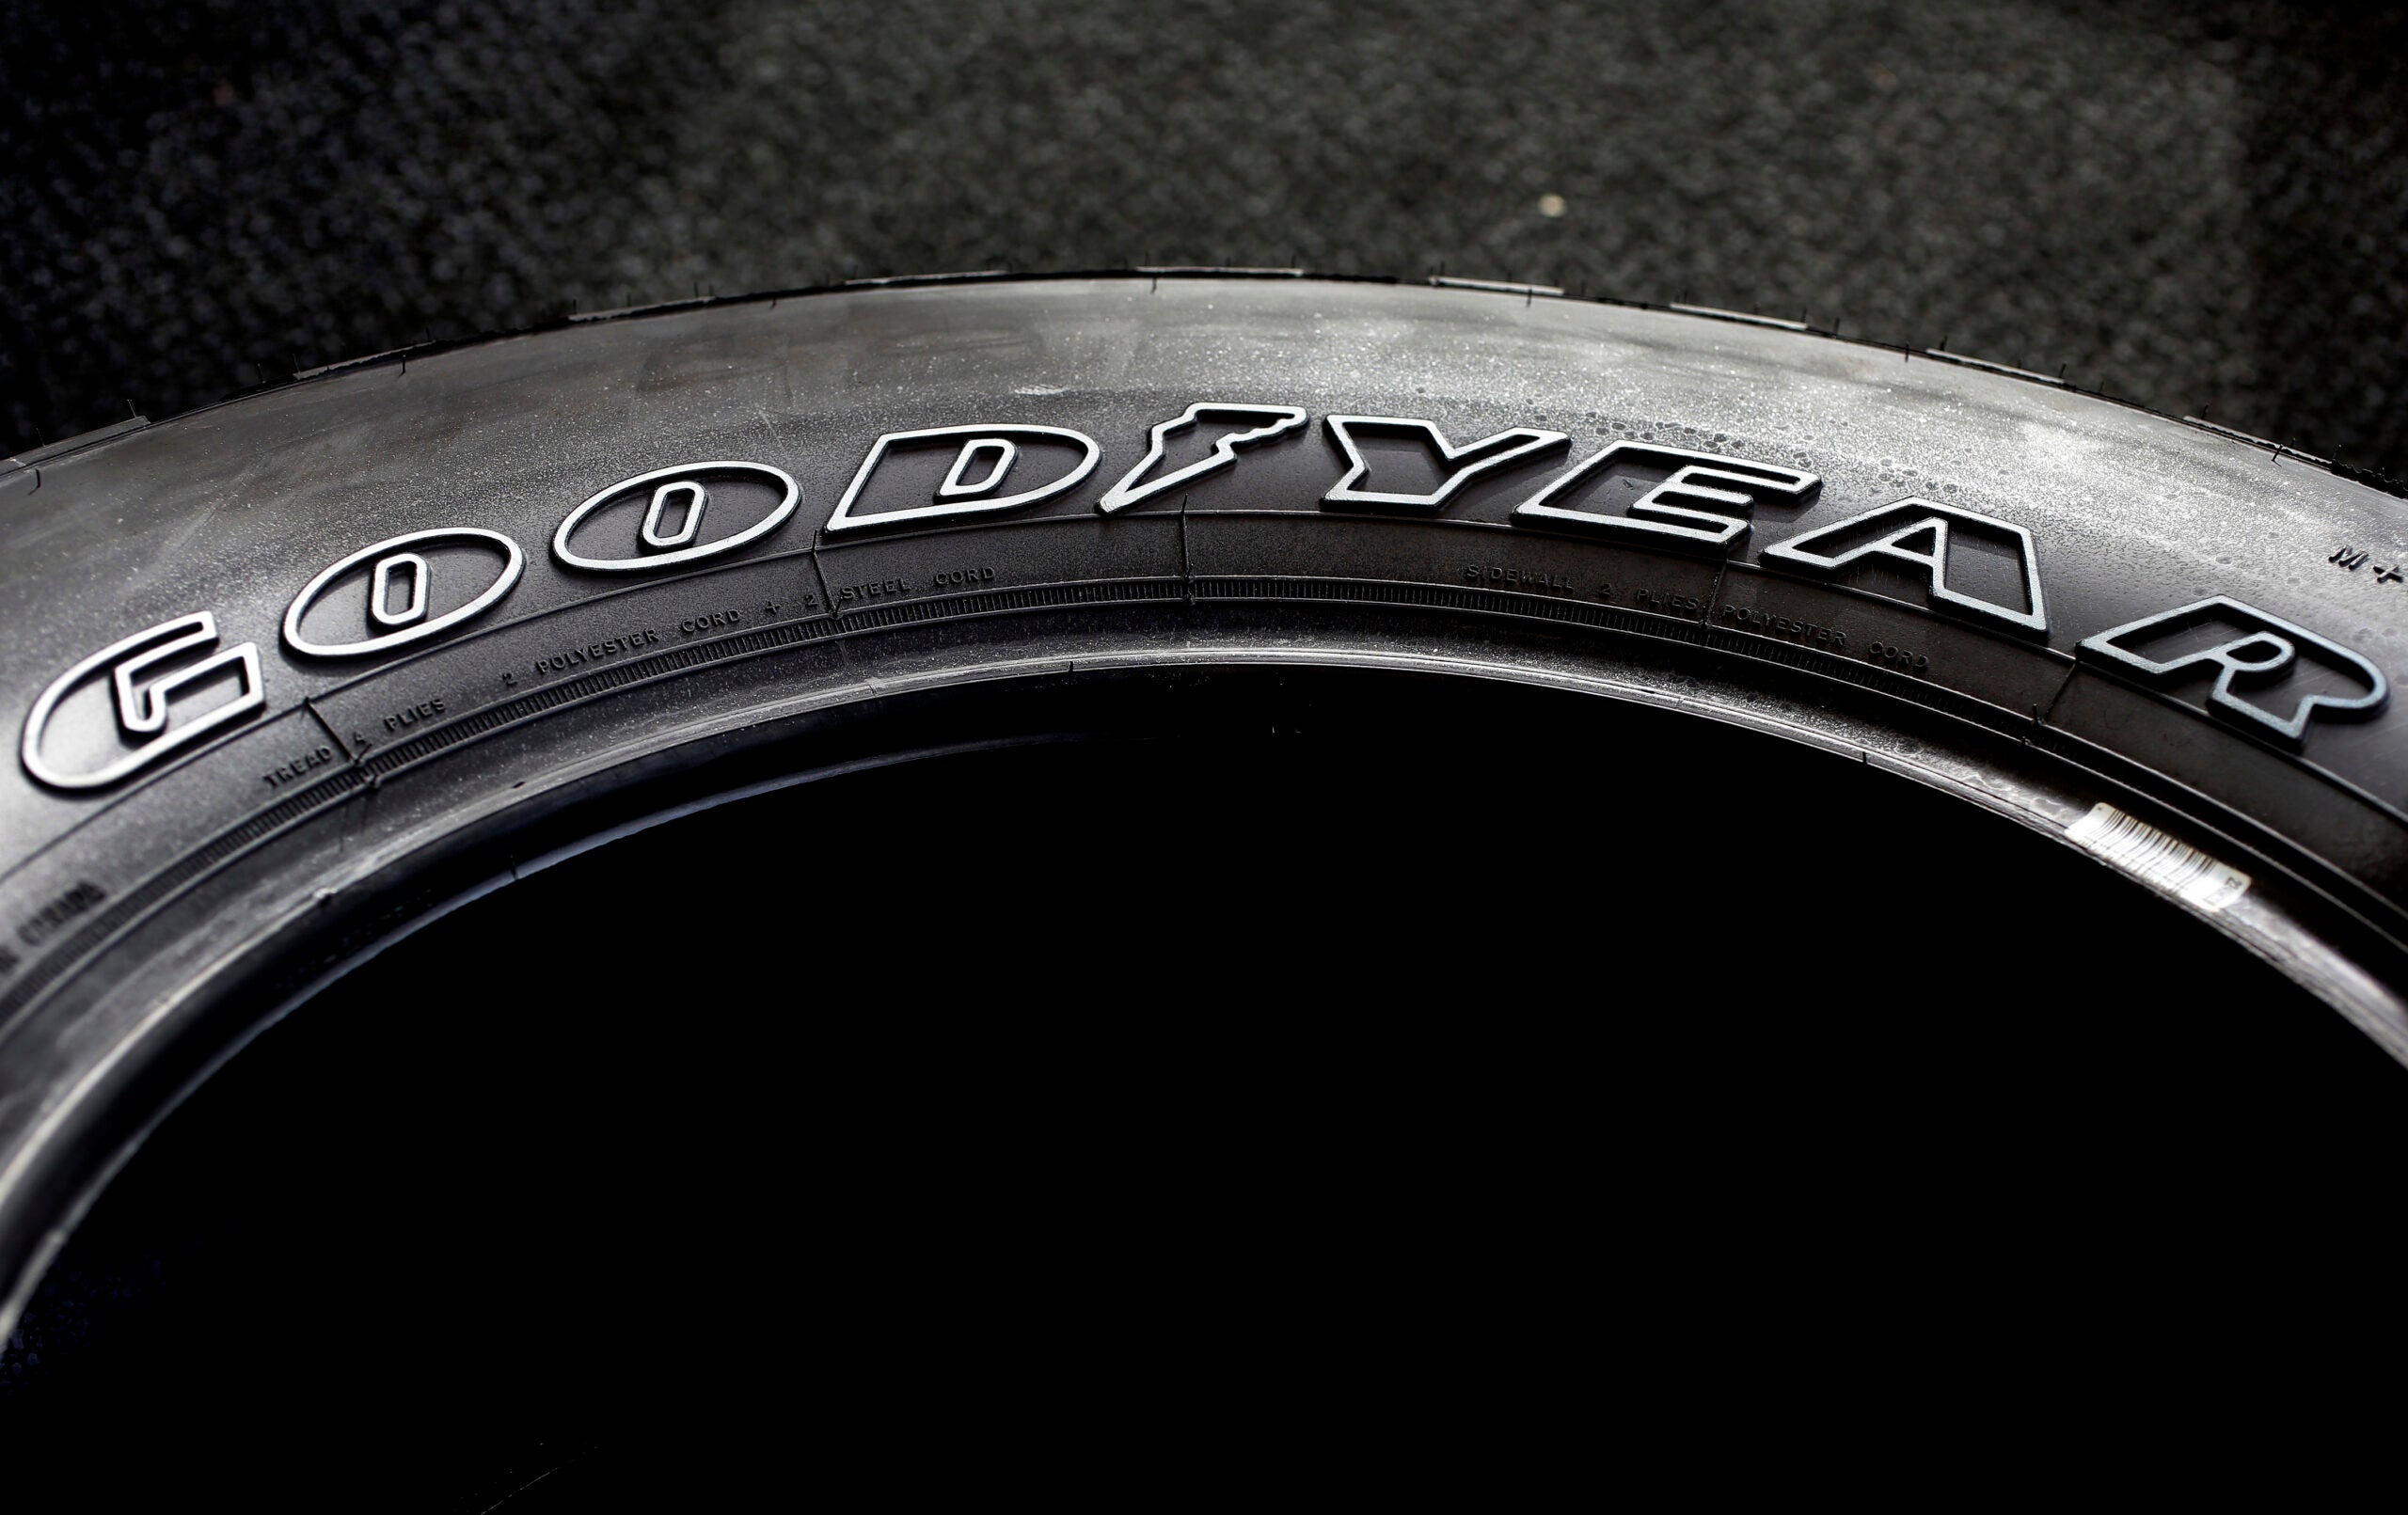 Government: Goodyear tires may have caused 95 deaths or injuries